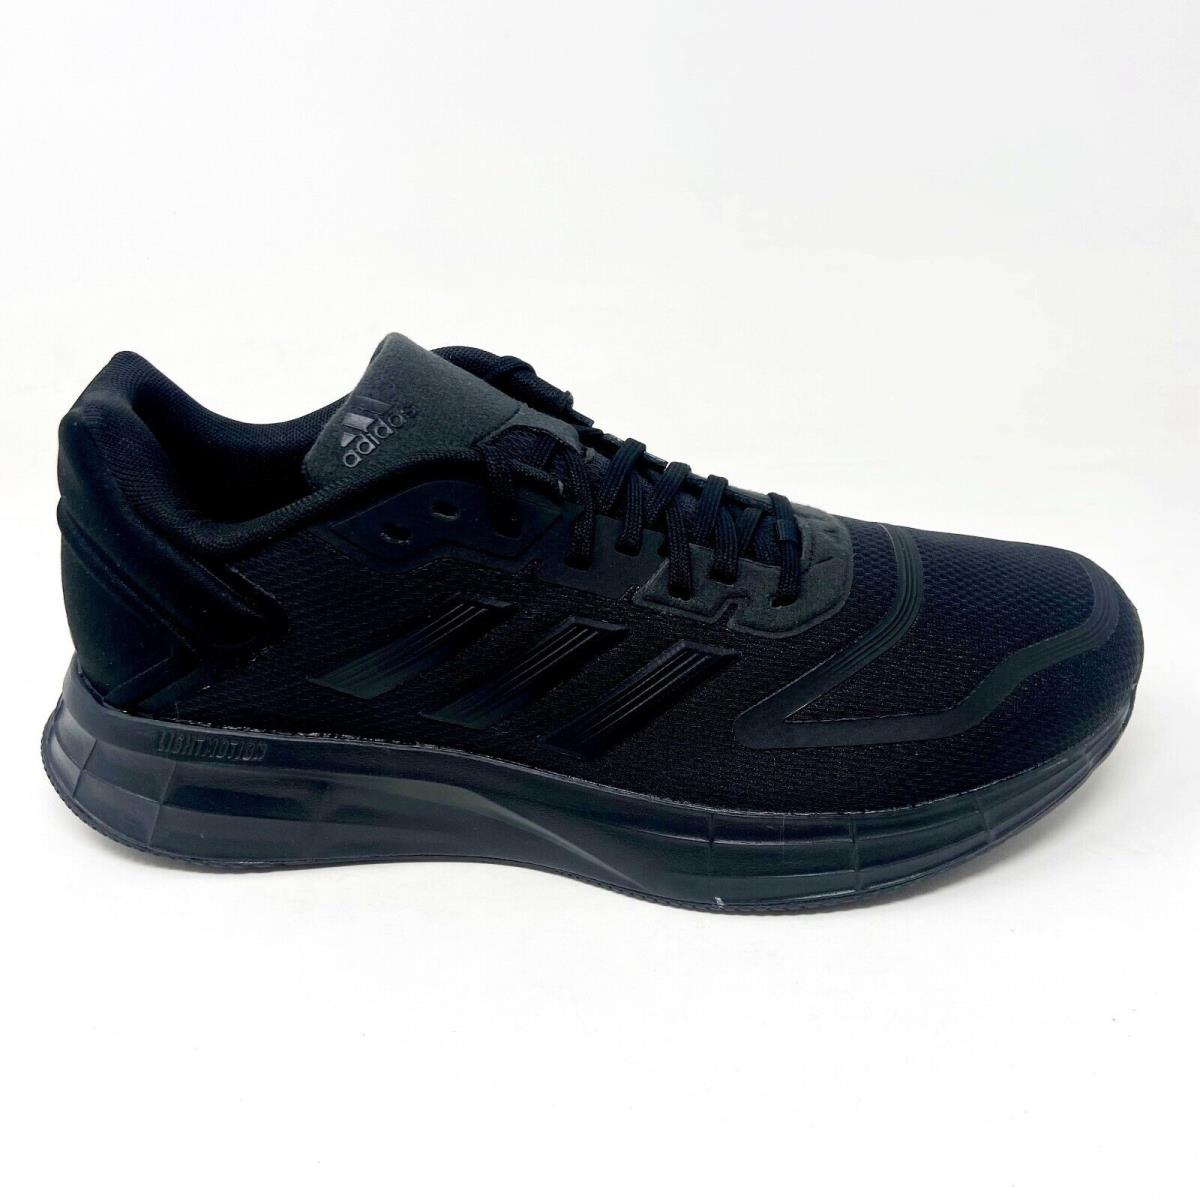 Adidas Duramo 10 Solid Core Black Mens Trainers Running Shoes GW8342